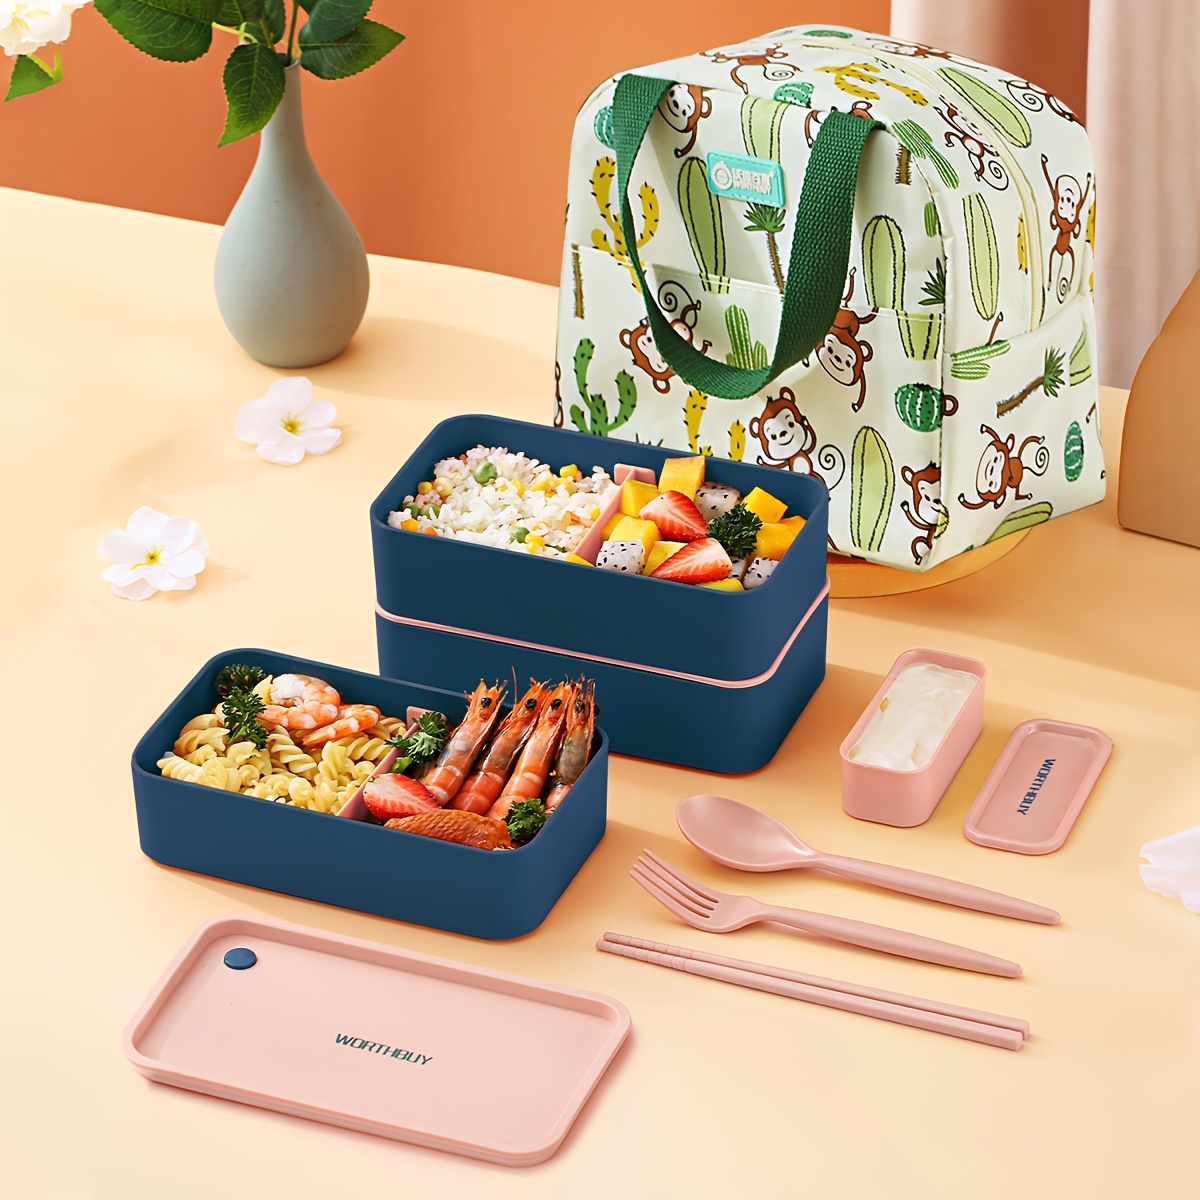 VANDHOME Bento Box Adult Lunch Box, Portable Insulated Lunch Container With  Bag, Leakproof Stainless…See more VANDHOME Bento Box Adult Lunch Box